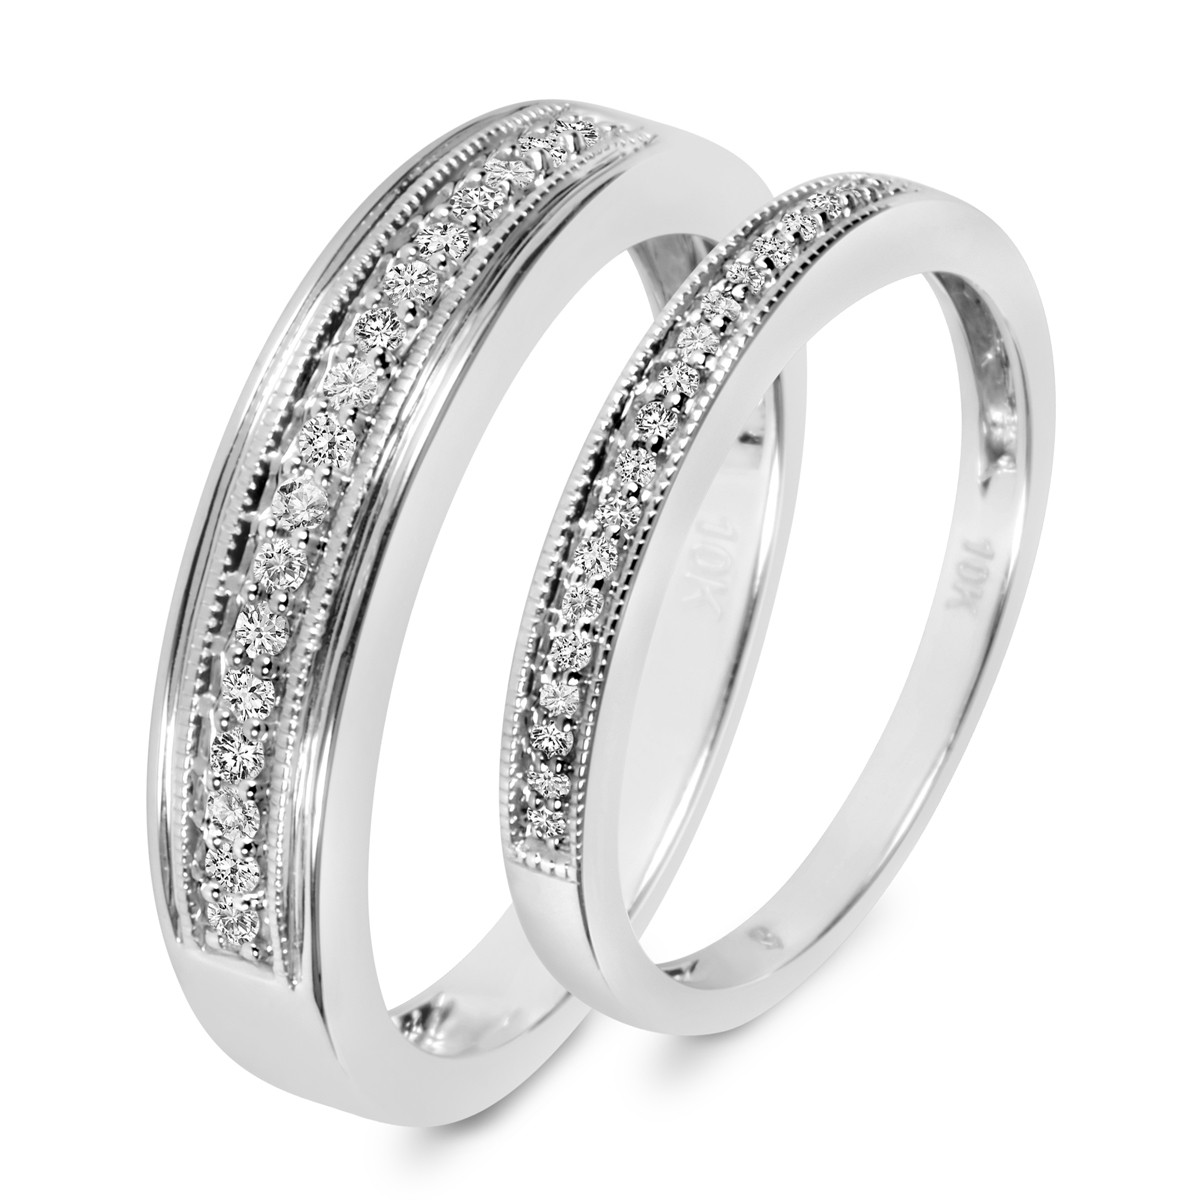 Wedding Band Sets His And Hers
 1 4 CT T W Diamond His And Hers Wedding Band Set 14K